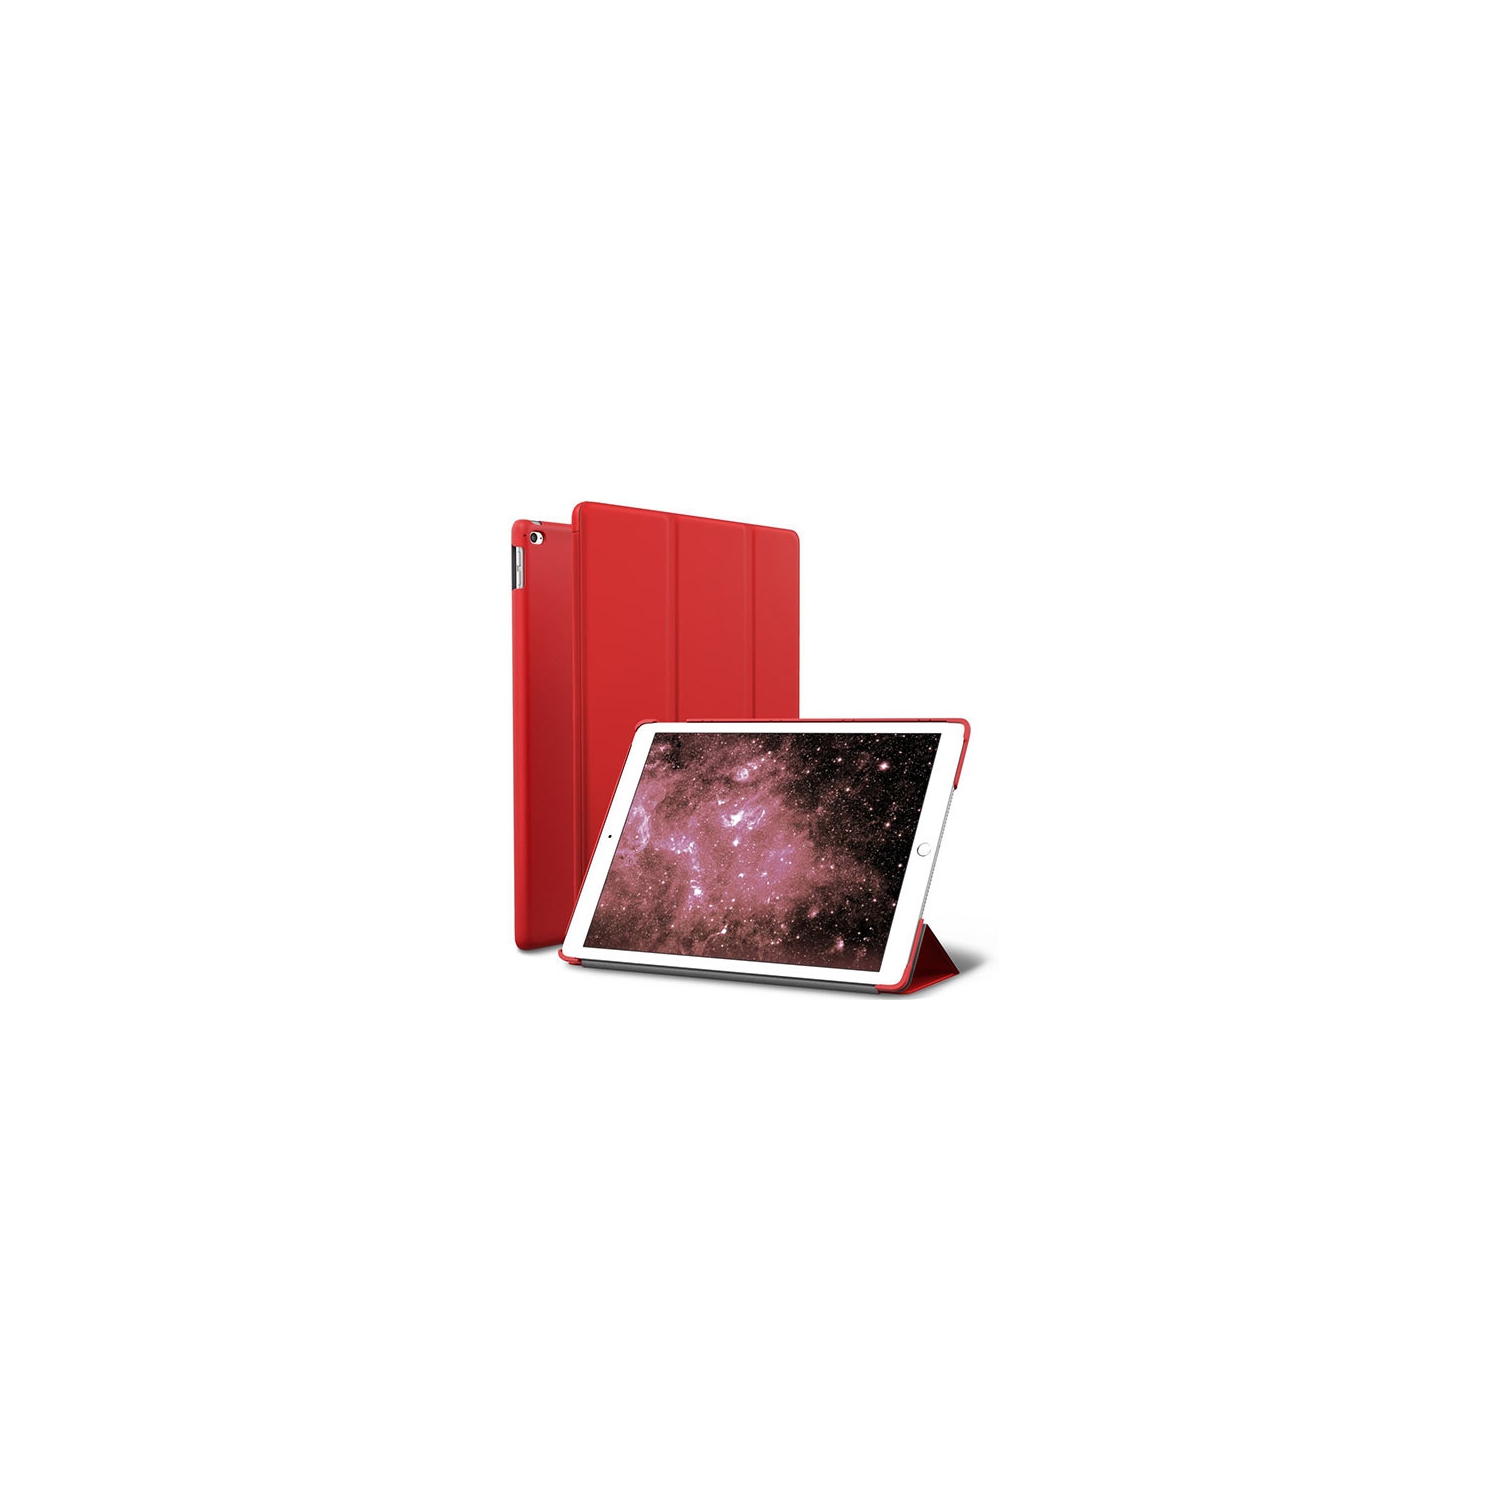 【CSmart】 Slim Magnetic Smart Cover Stand Case for iPad Air 2 2nd Gen. (9.7"), Red